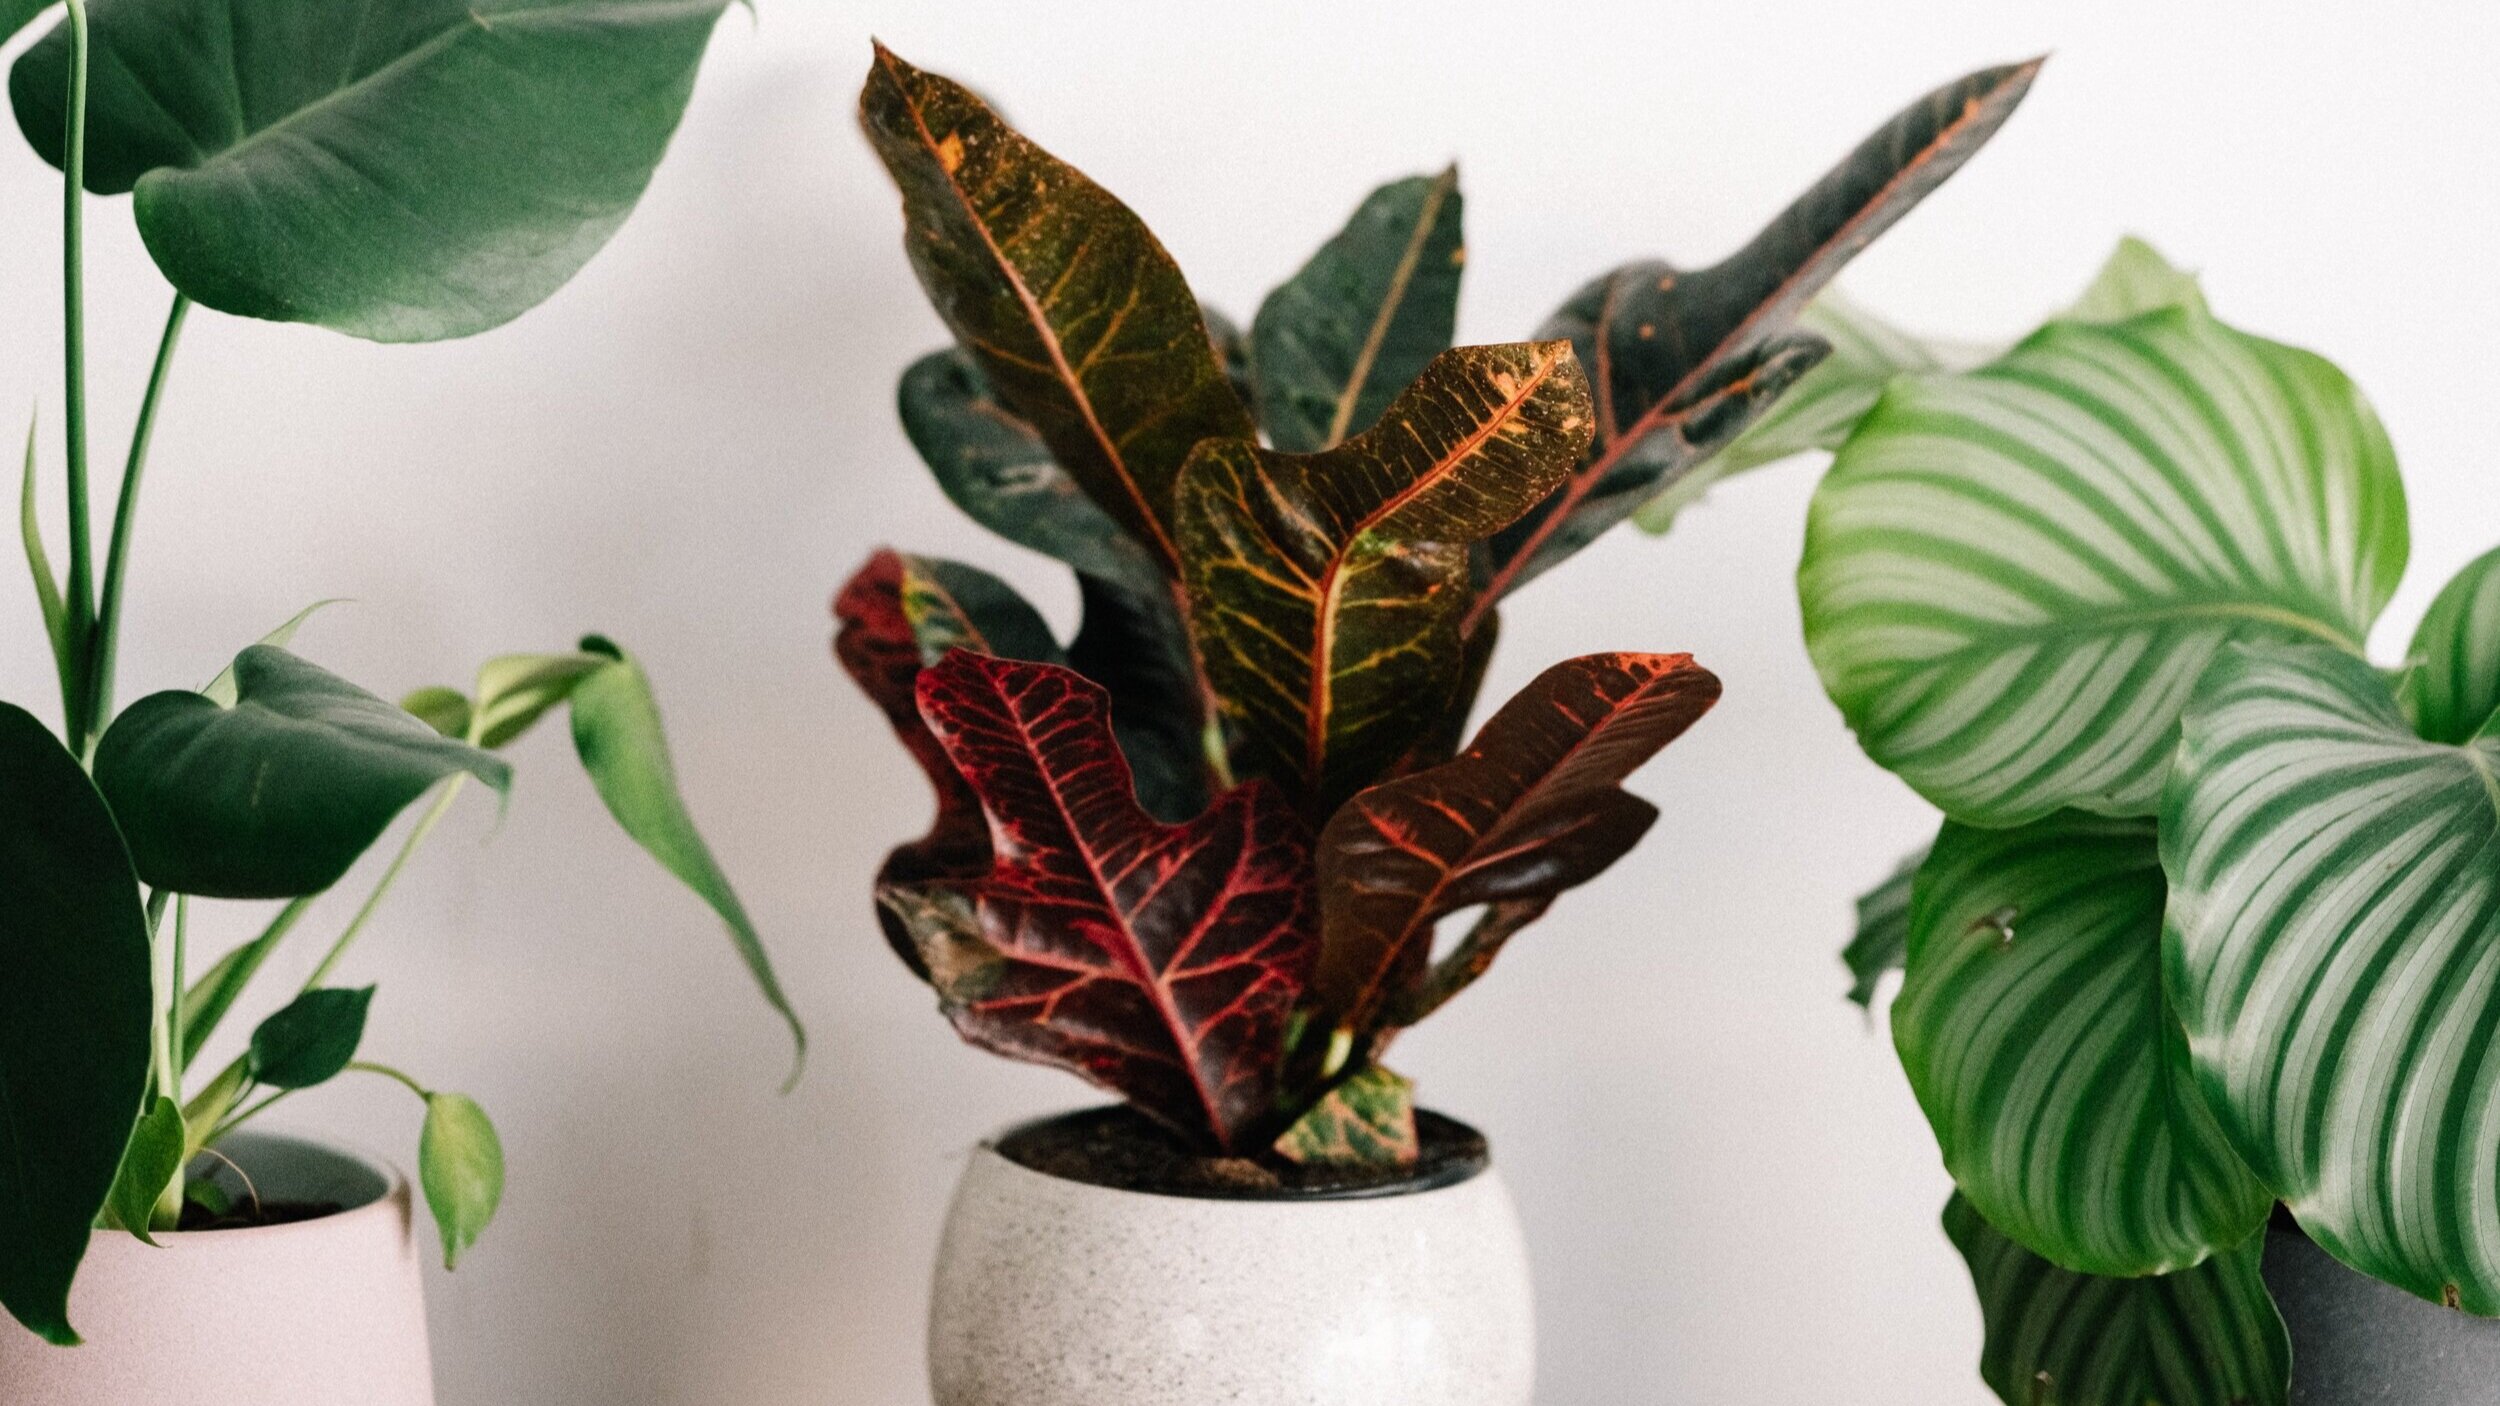 How To Care for a Calathea Plant - The Sill